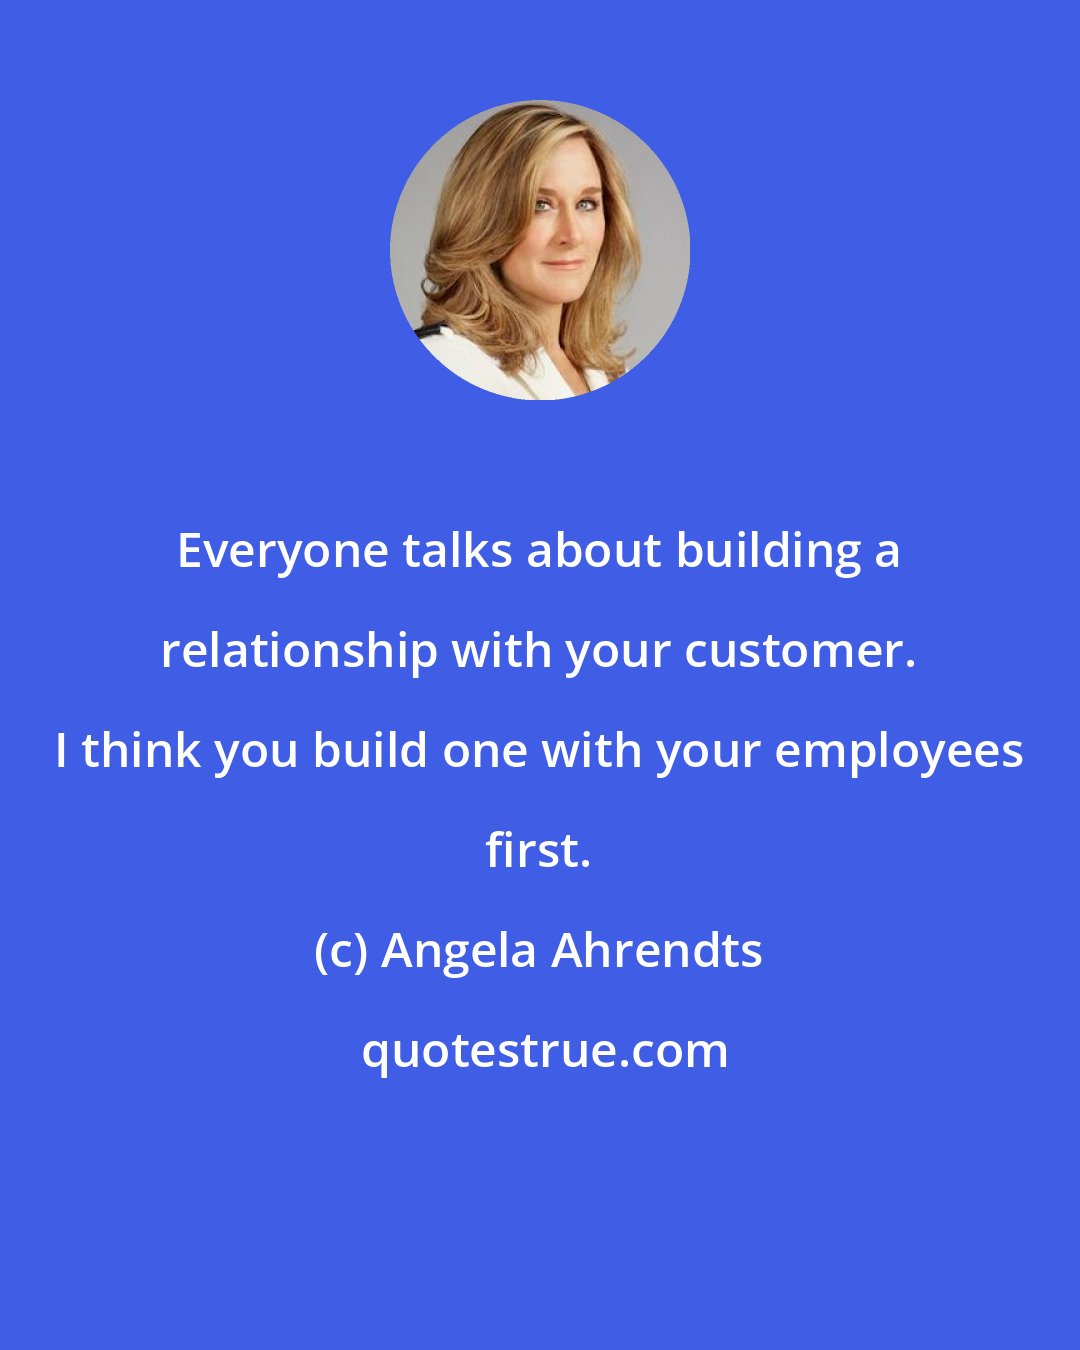 Angela Ahrendts: Everyone talks about building a relationship with your customer. I think you build one with your employees first.